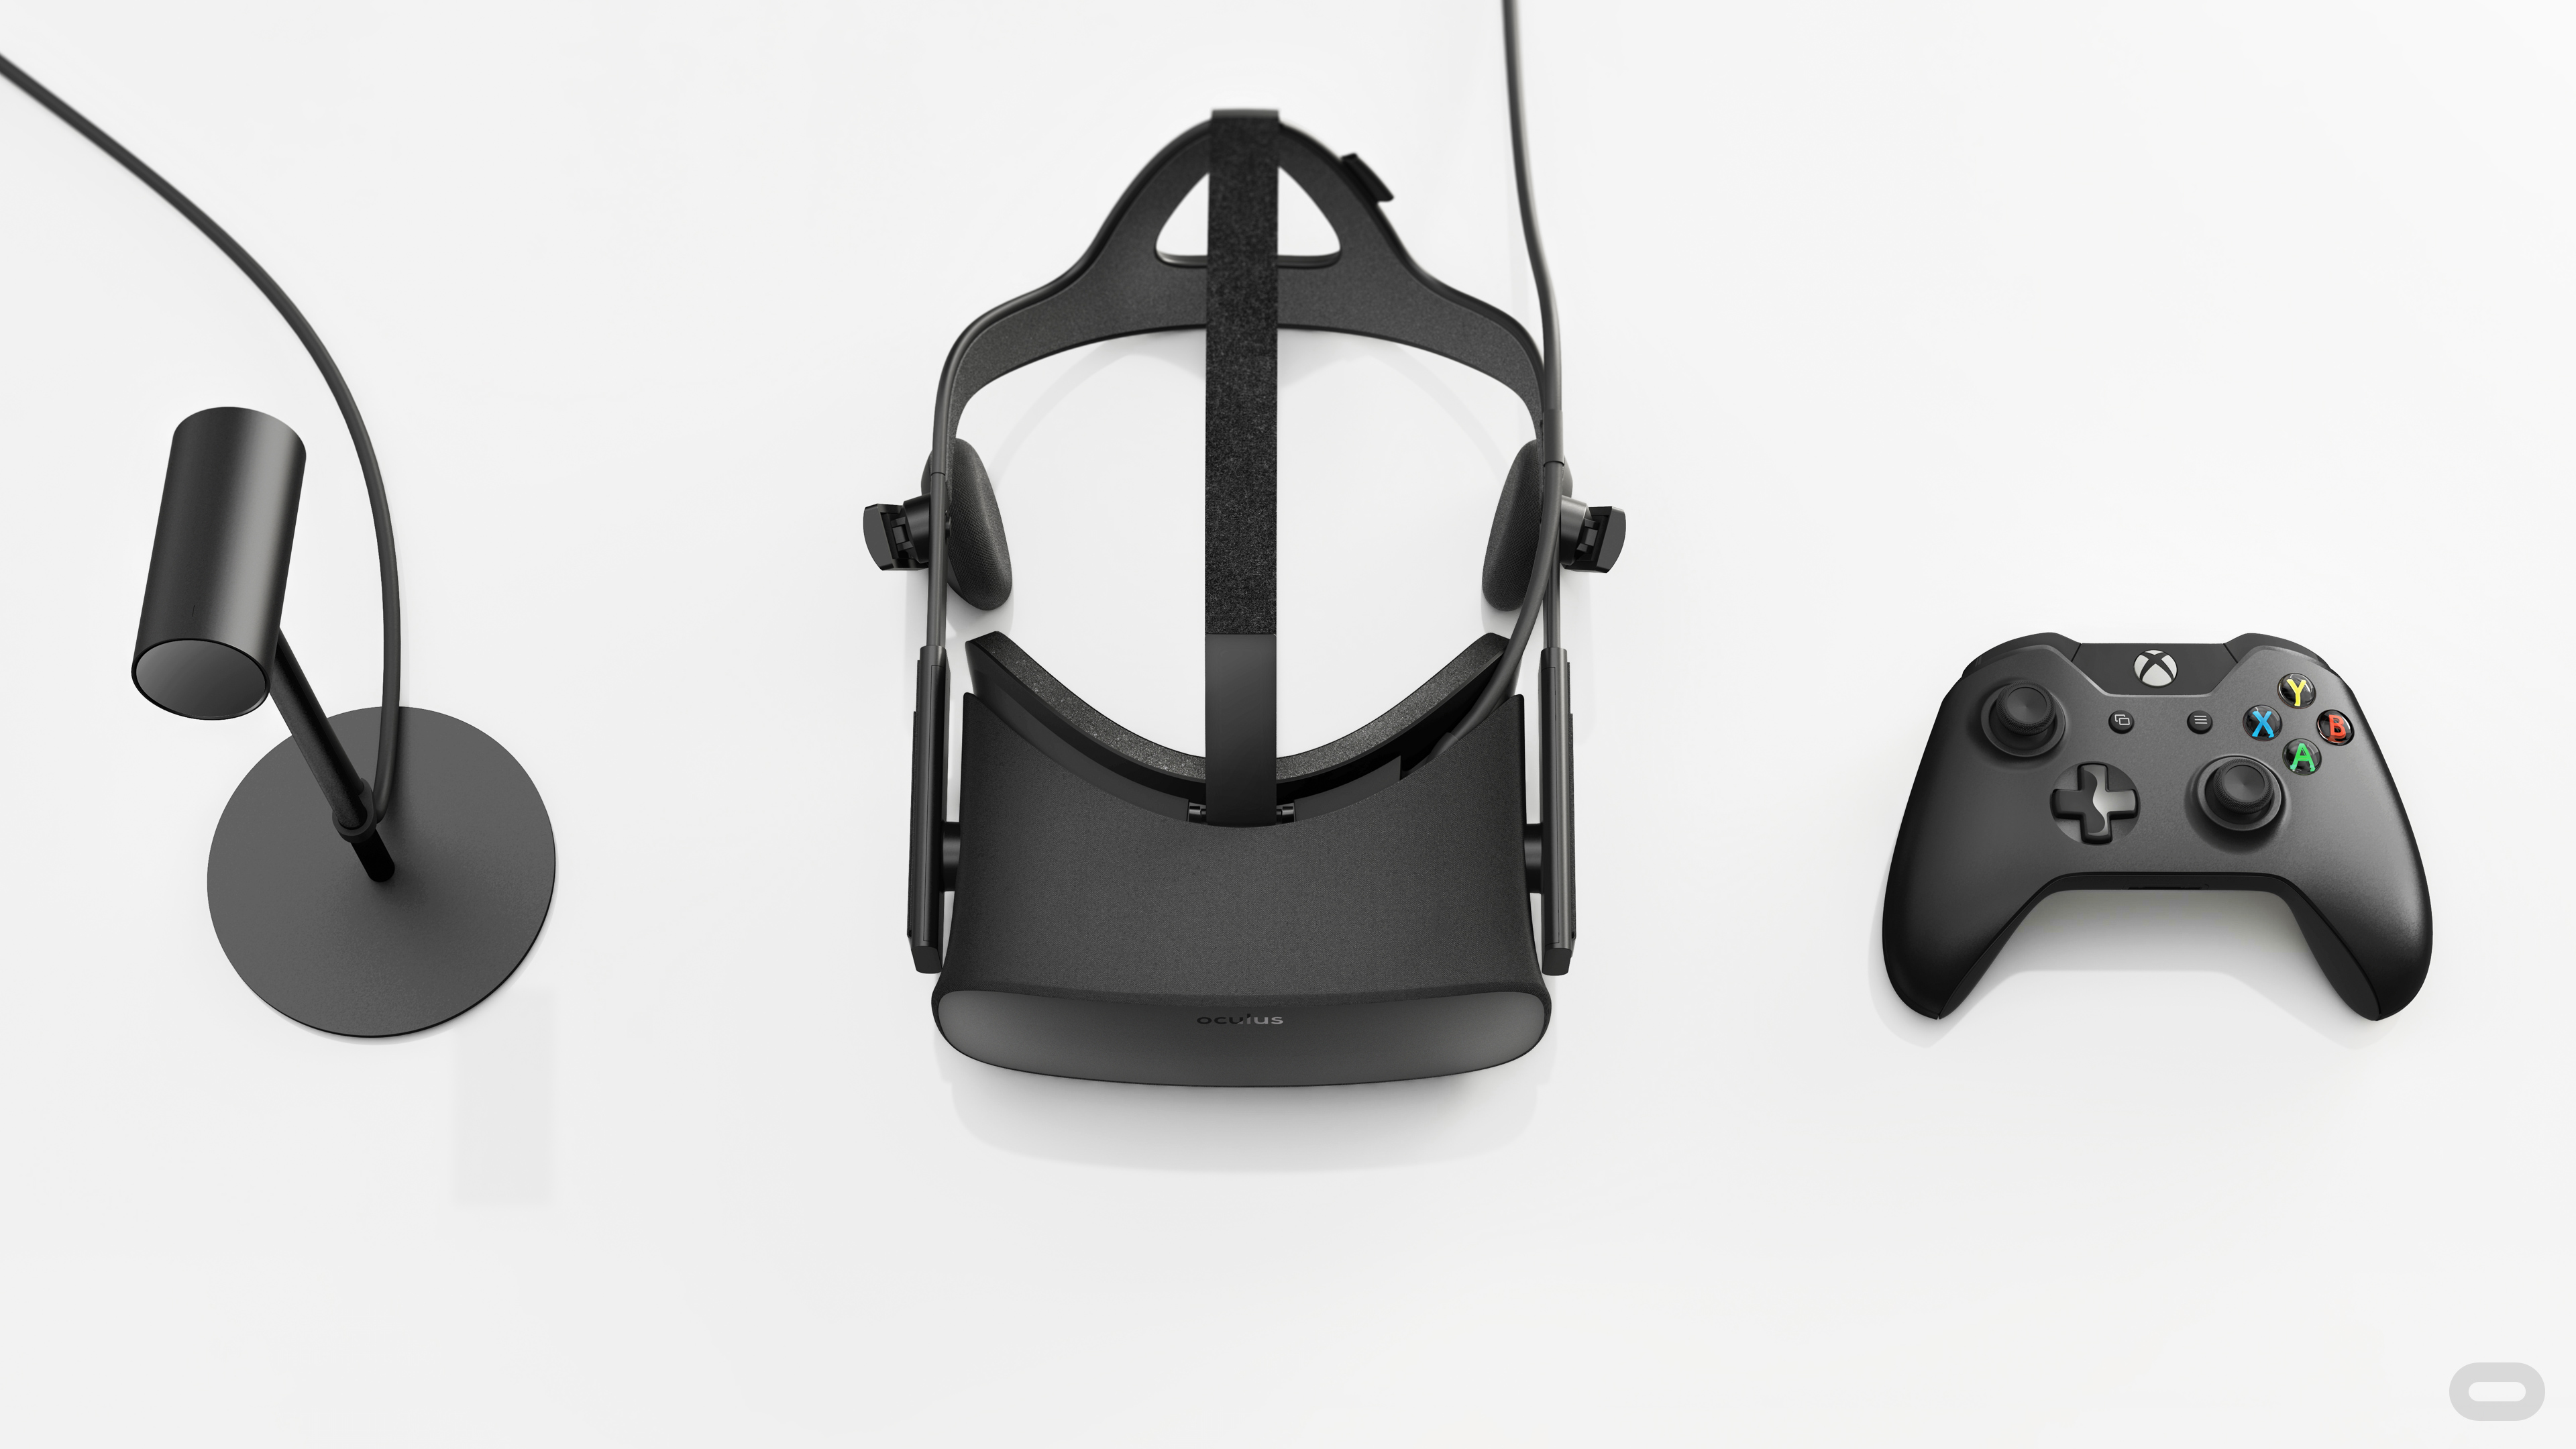 Oculus Rift will cost over $350 so there are “no compromises,” | Ars Technica